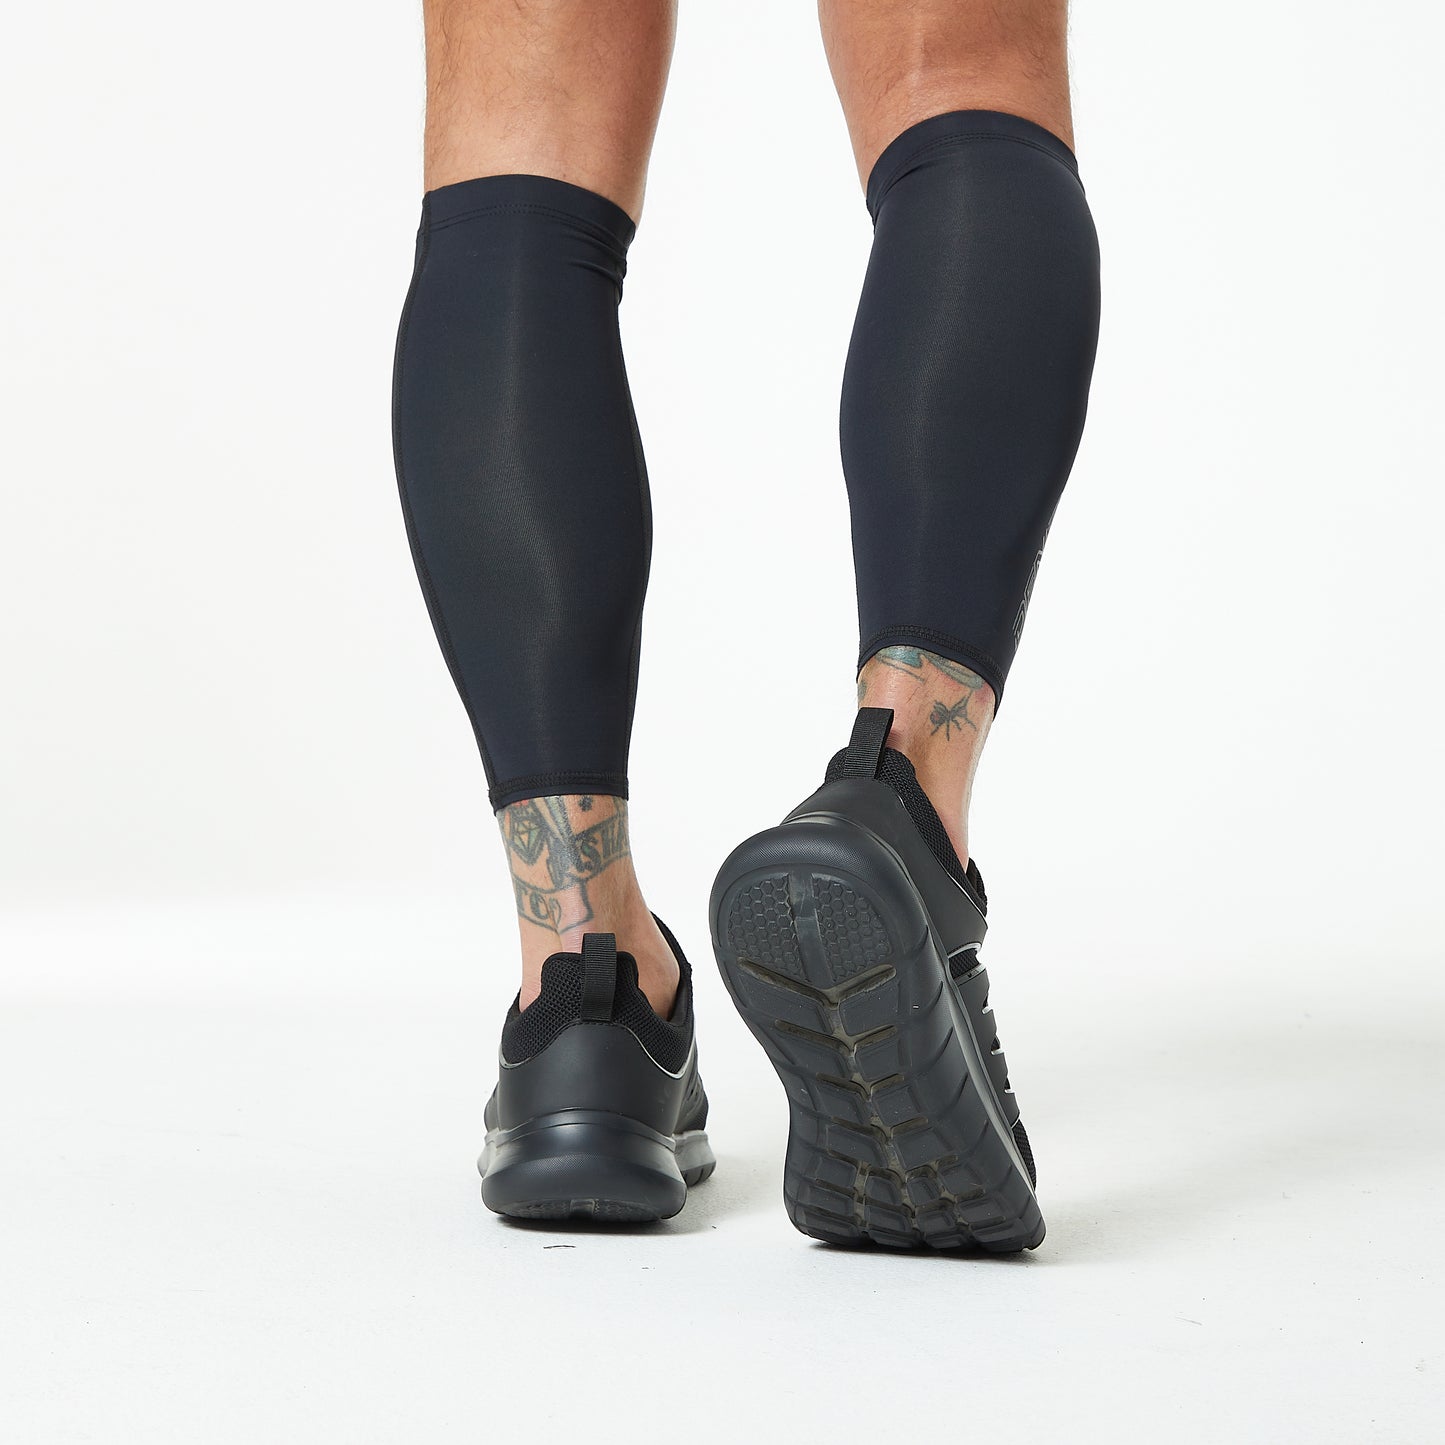 Black Mountain Products Therapeutic Warming Extra Thick Warming Calf  Compression Sleeve, Black, Large